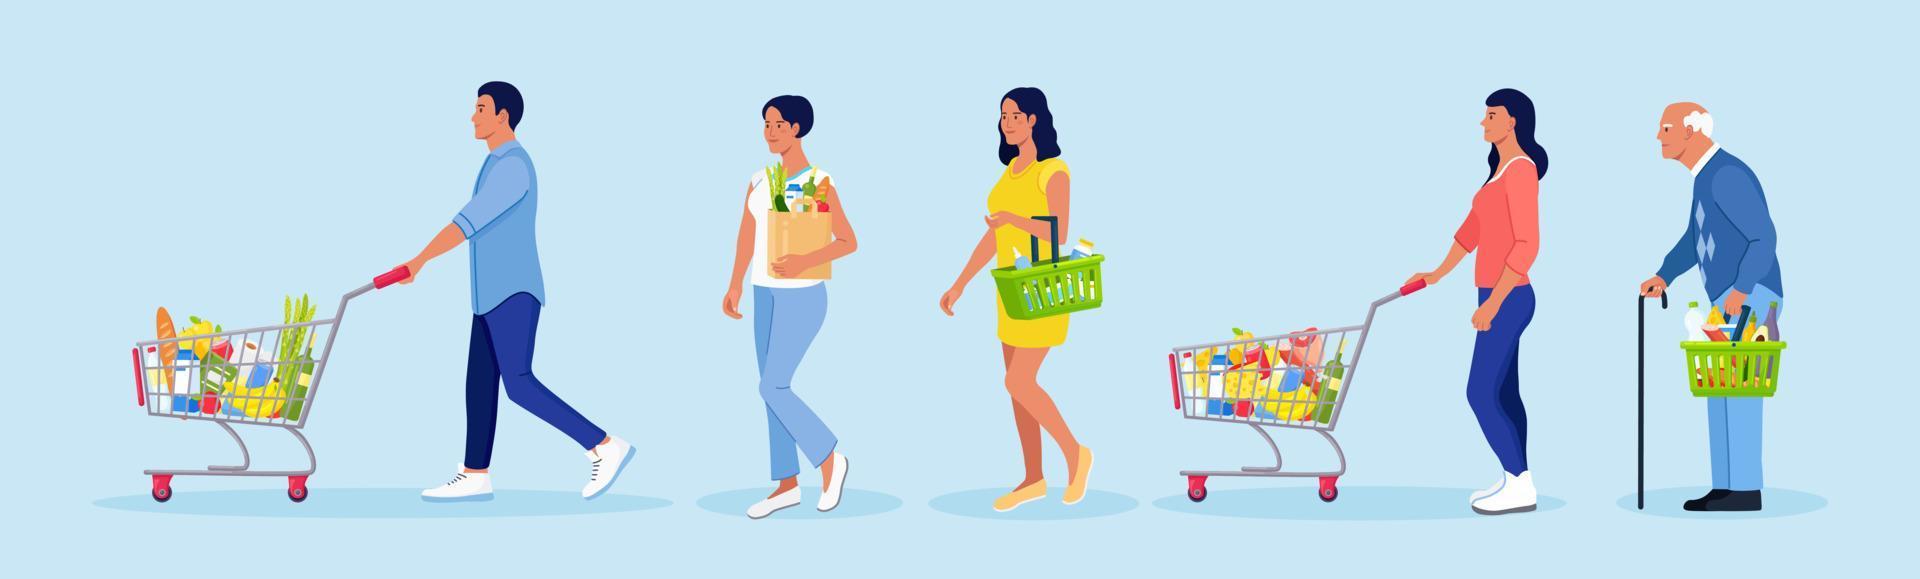 Grocery store queue. People with shopping carts, basket, eco bag with food. Crowd shoppers waiting in long line in supermarket. Crowded queue to the cashier. Customer service vector